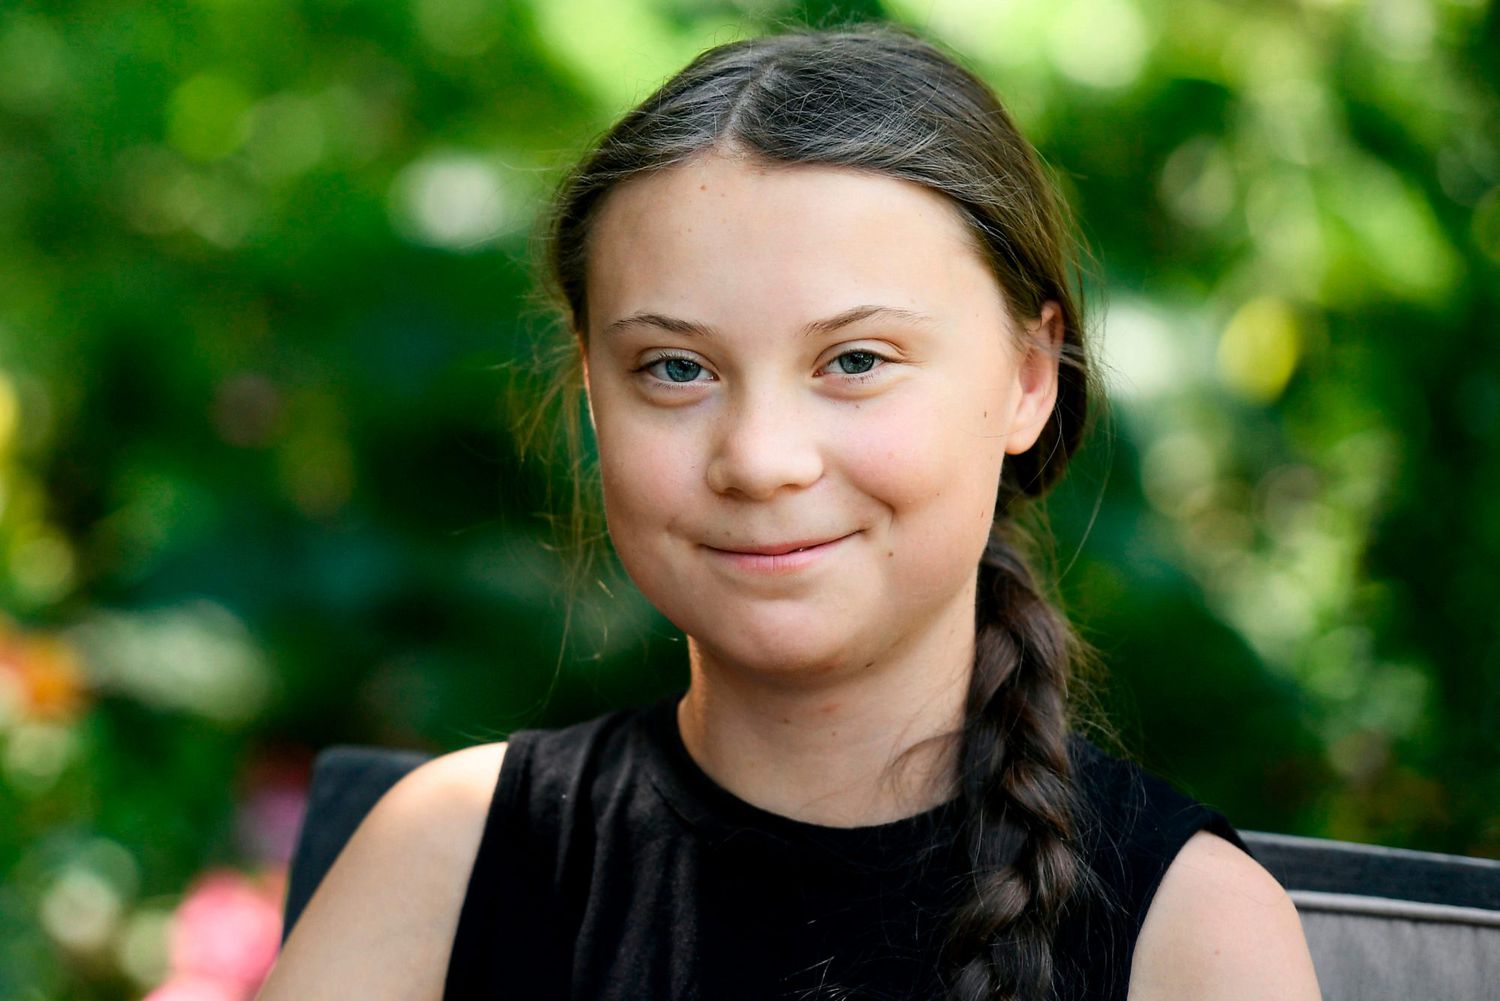 Greta Thunberg toolkit case: Delhi Police detained climate activist Disha Ravi from Bengaluru for her role in “toolkit” shared by Greta Thunberg.